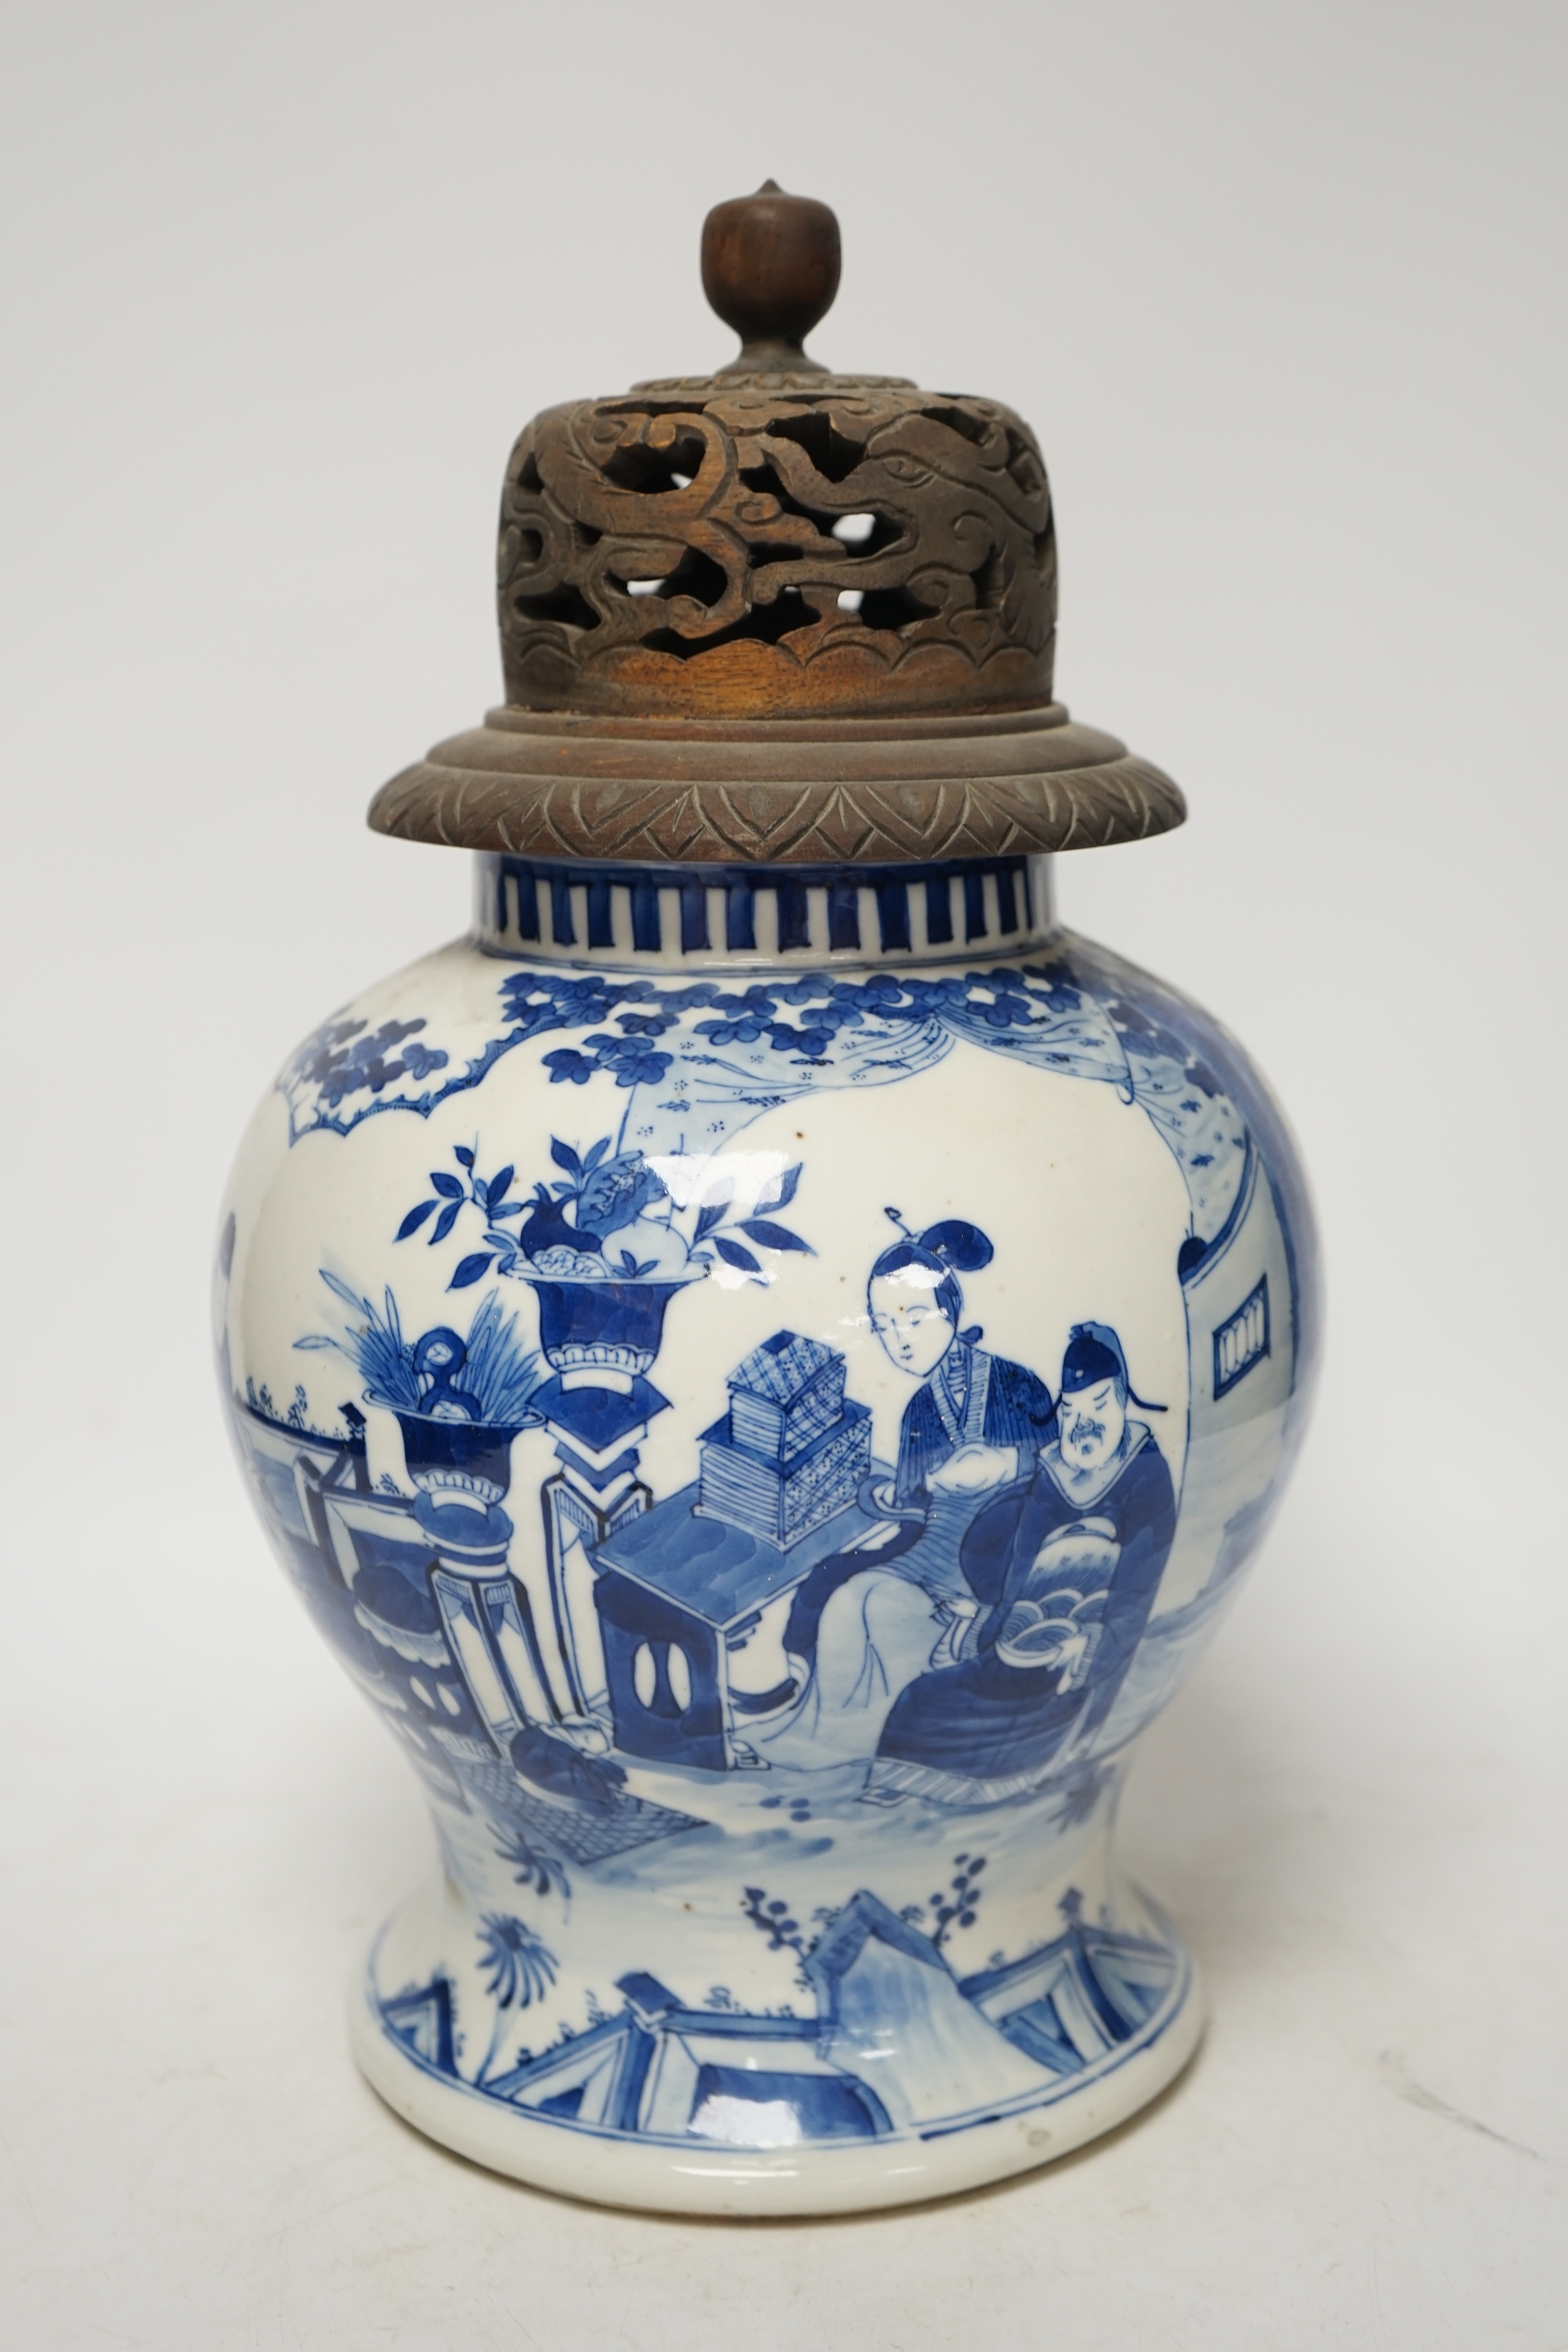 A 19th century Chinese blue and white baluster jar, painted with a dignitary and attendants at a table with objects in a garden setting, wood cover, 35cm. Condition - good